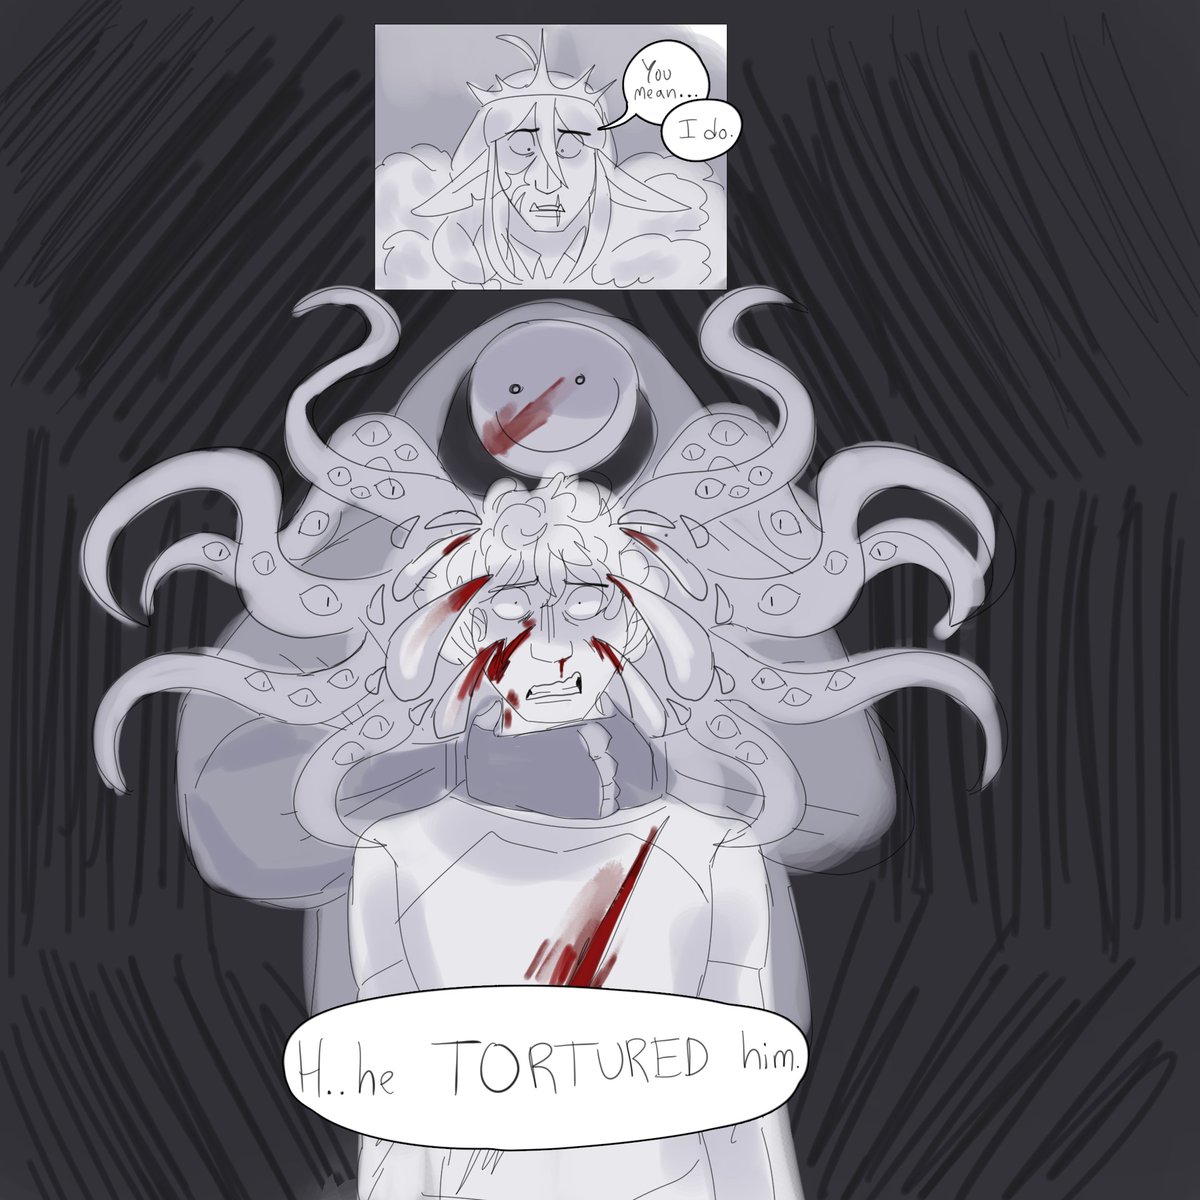 tw// blood, implied violence, trauma, body horror, and very light description and portrayal of torture

red snow, part two: torture
(1/2)
.
.
.
#technobladefanart #technoblade #tommyinnit #philza #ranboo #tubbofanart #ranboofanart #dreamsmpfanart #dreamsmp 